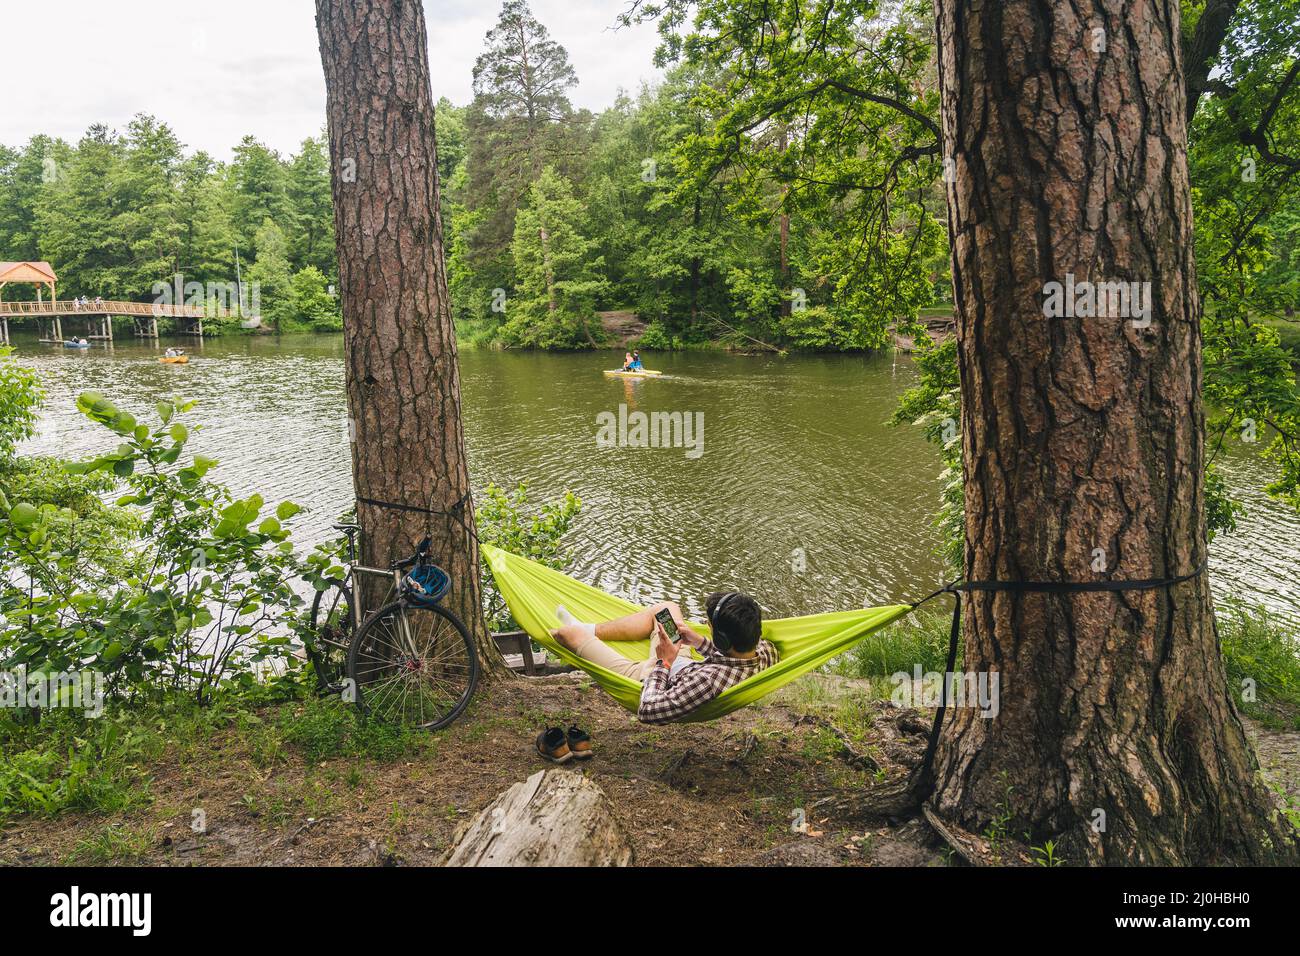 Young caucasian man resting in hammock, listening to music on headphones and using smartphone afterwards on bicycle in forest ne Stock Photo